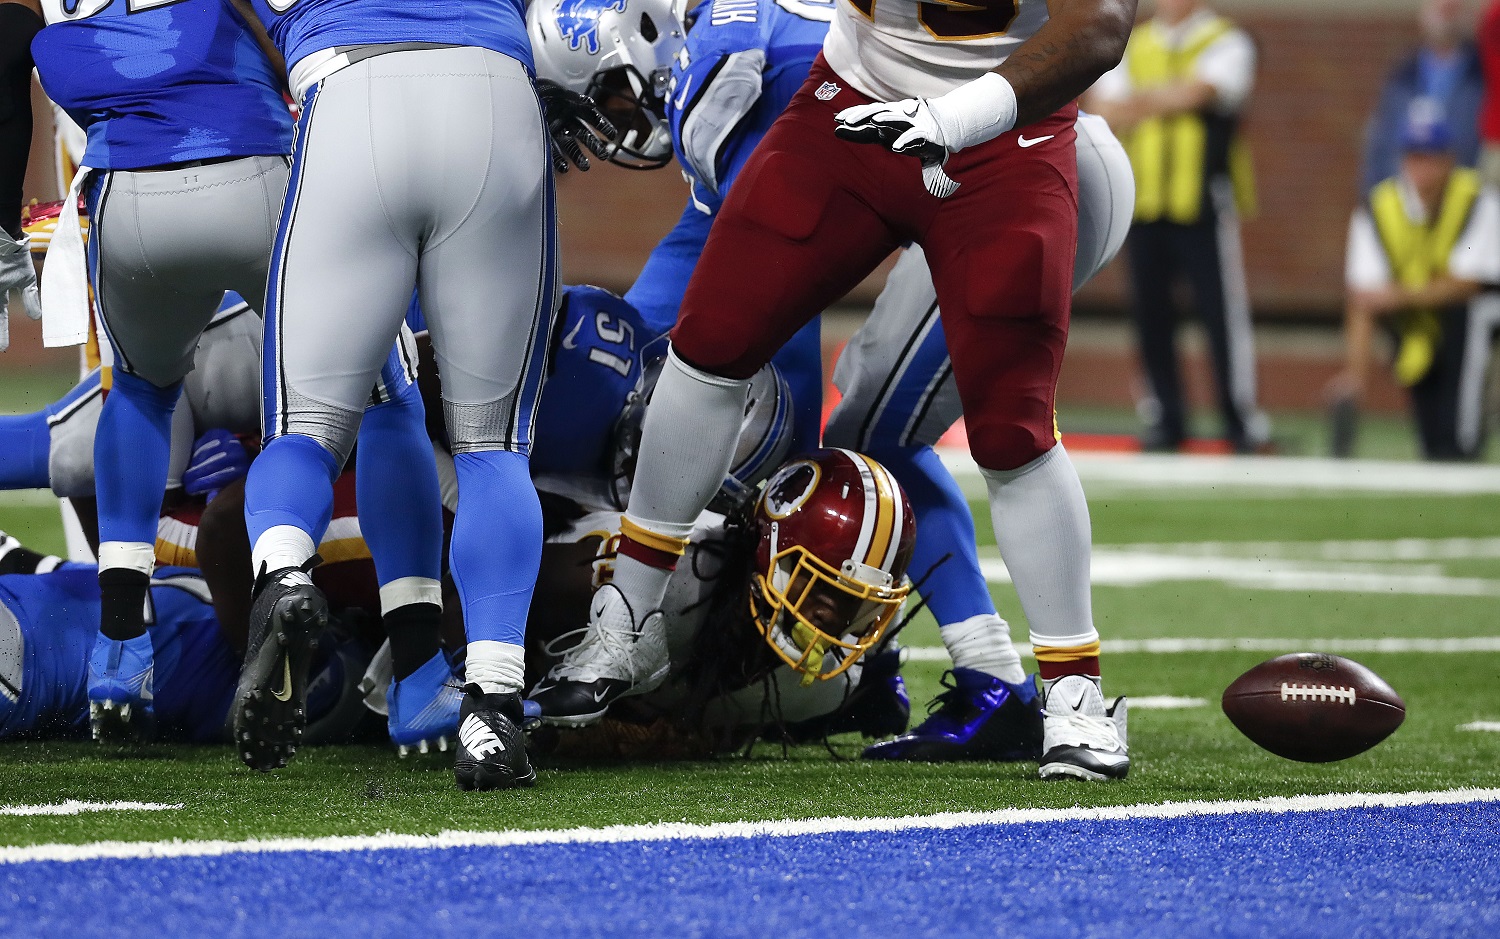 Washington Redskins running back Matt Jones fumbles into the end zone against the Detroit Lions during an NFL football game in Detroit, Monday, Oct. 24, 2016. Detroit recovered the fumble. (AP Photo/Paul Sancya)